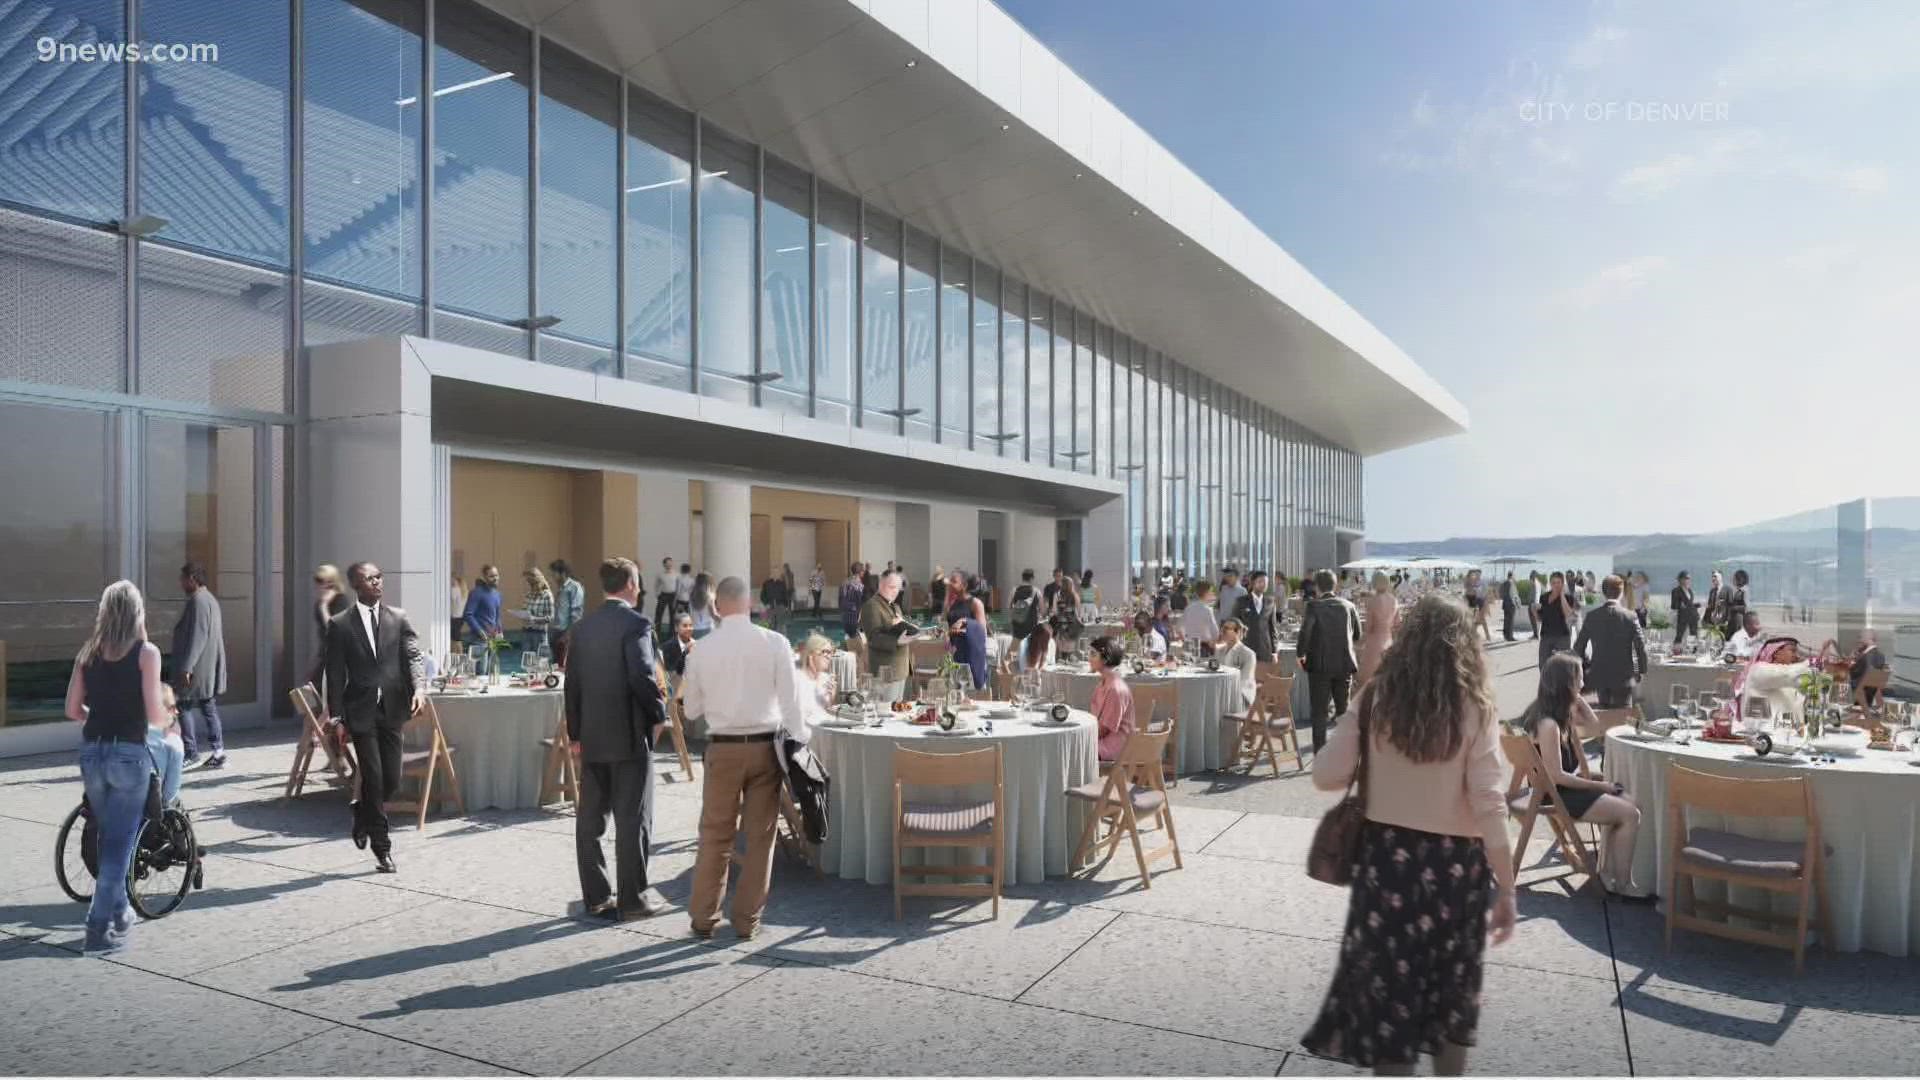 Once construction is completed, the Colorado Convention Center will have a rooftop terrace with sweeping views of Denver's skyline and the mountains.